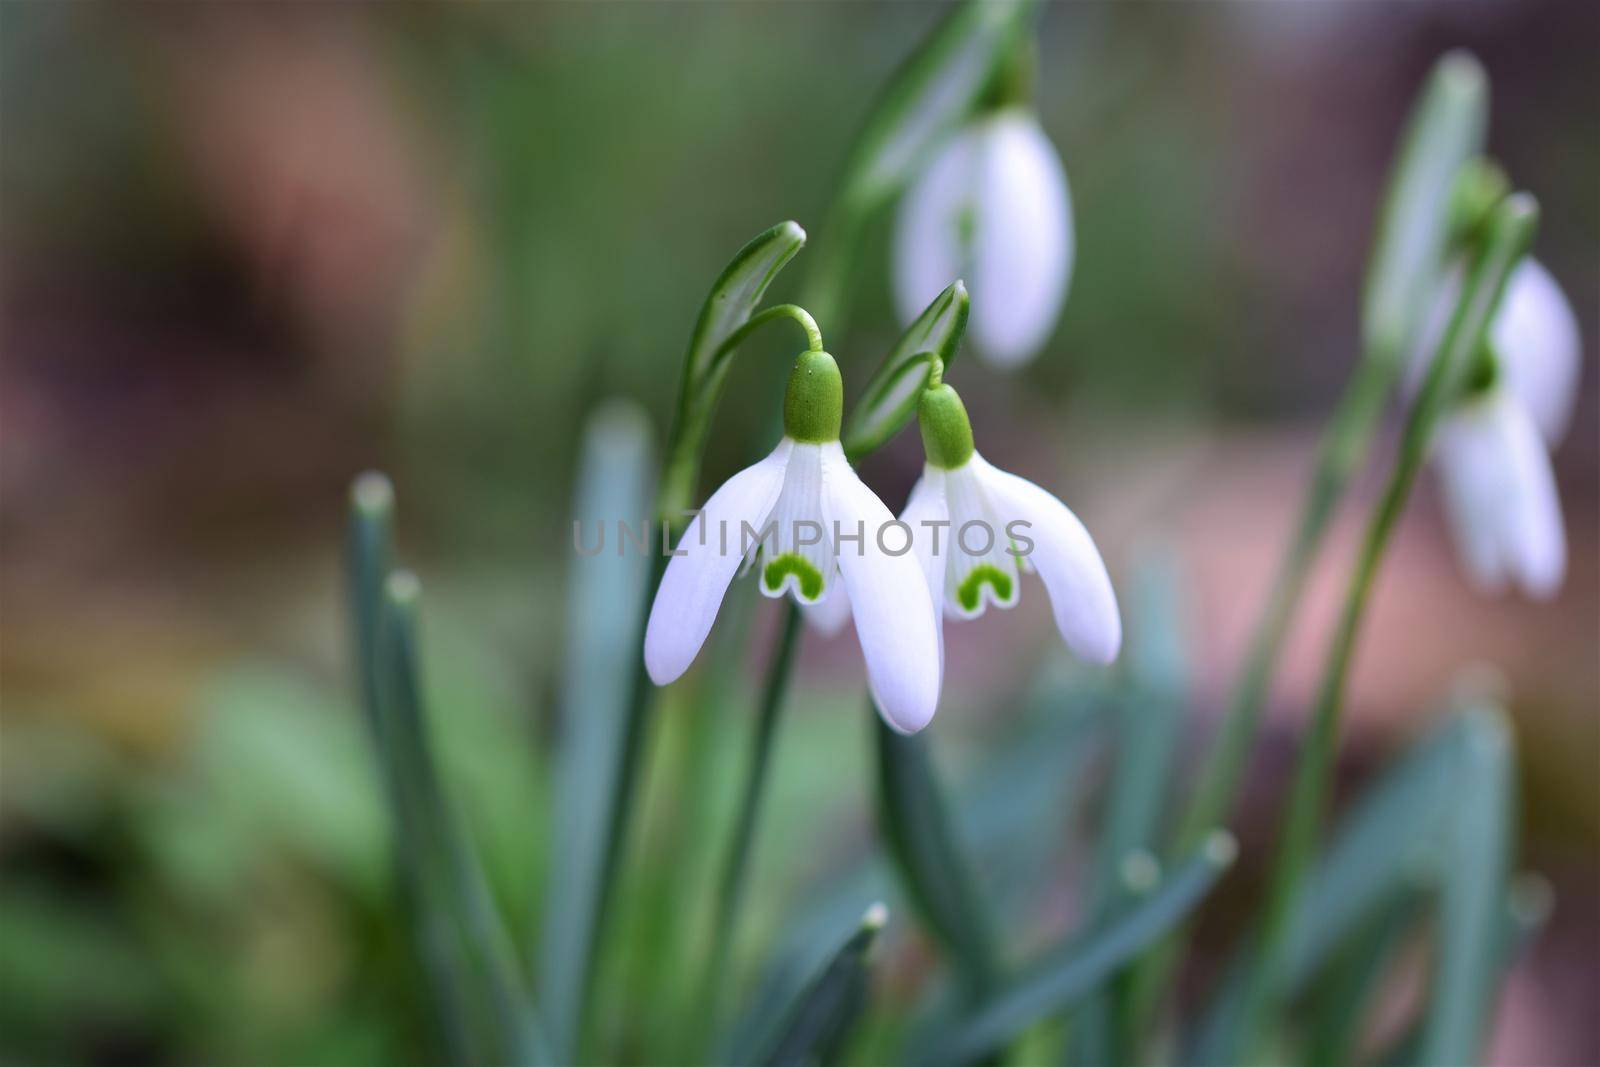 Galanthus - Snowdrops in the bed as a close up by Luise123